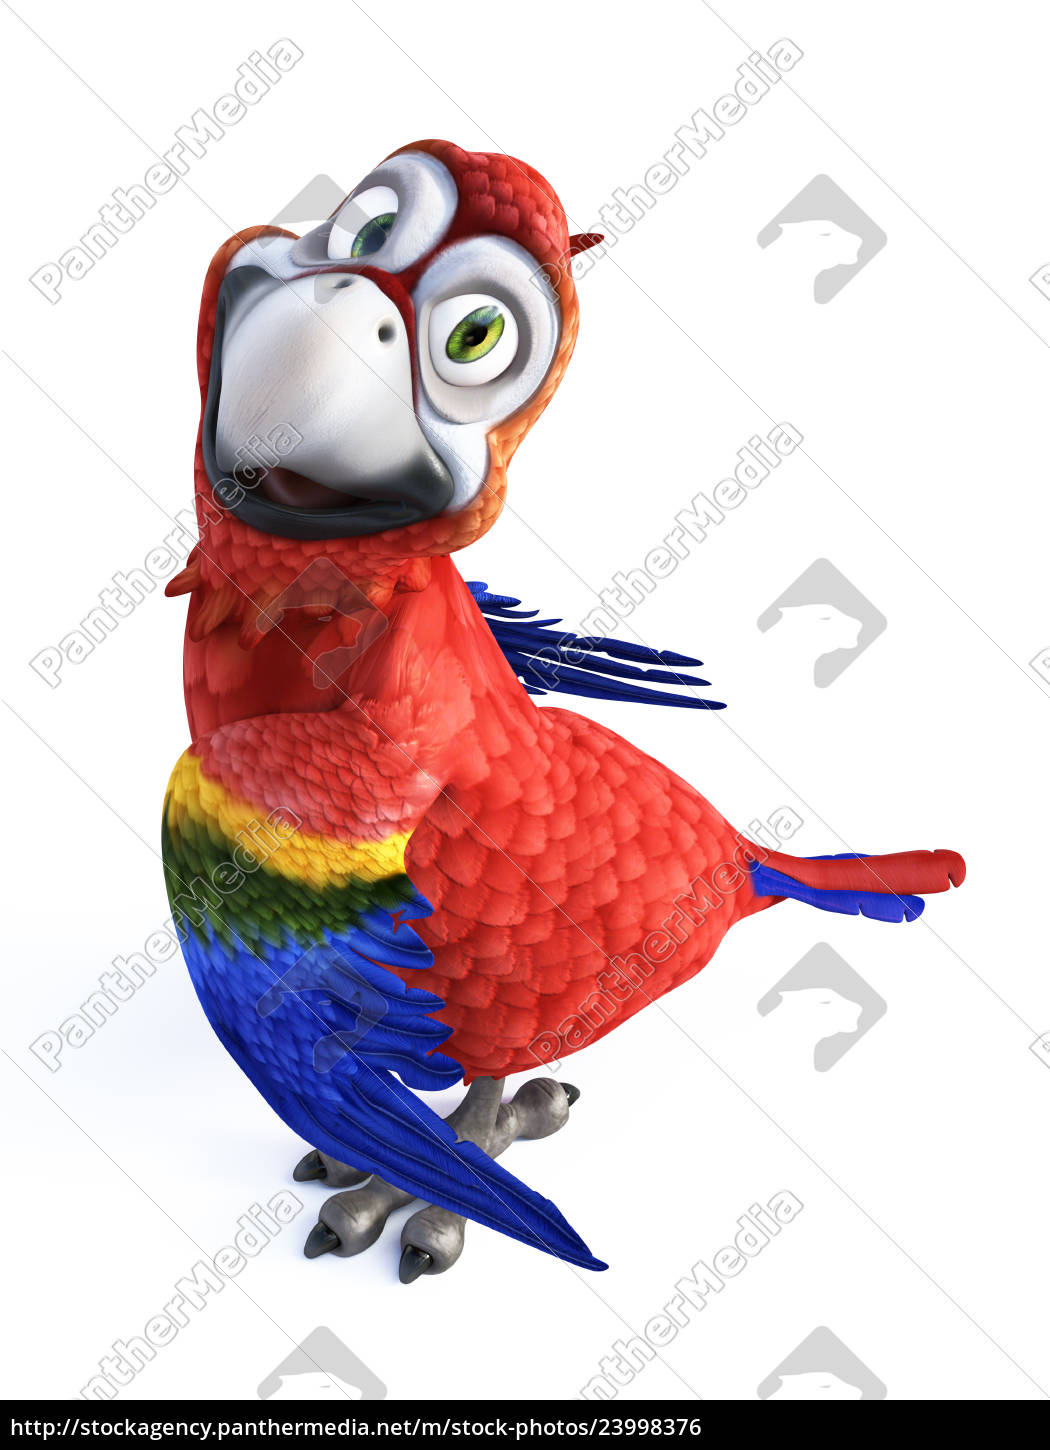 3d Rendering Of Cartoon Parrot Smiling Royalty Free Photo 23998376 Panthermedia Stock Agency Browse parrot cartoon pictures, photos, images, gifs, and videos on photobucket https stockagency panthermedia net m stock photos 23998376 3d rendering of cartoon parrot smiling